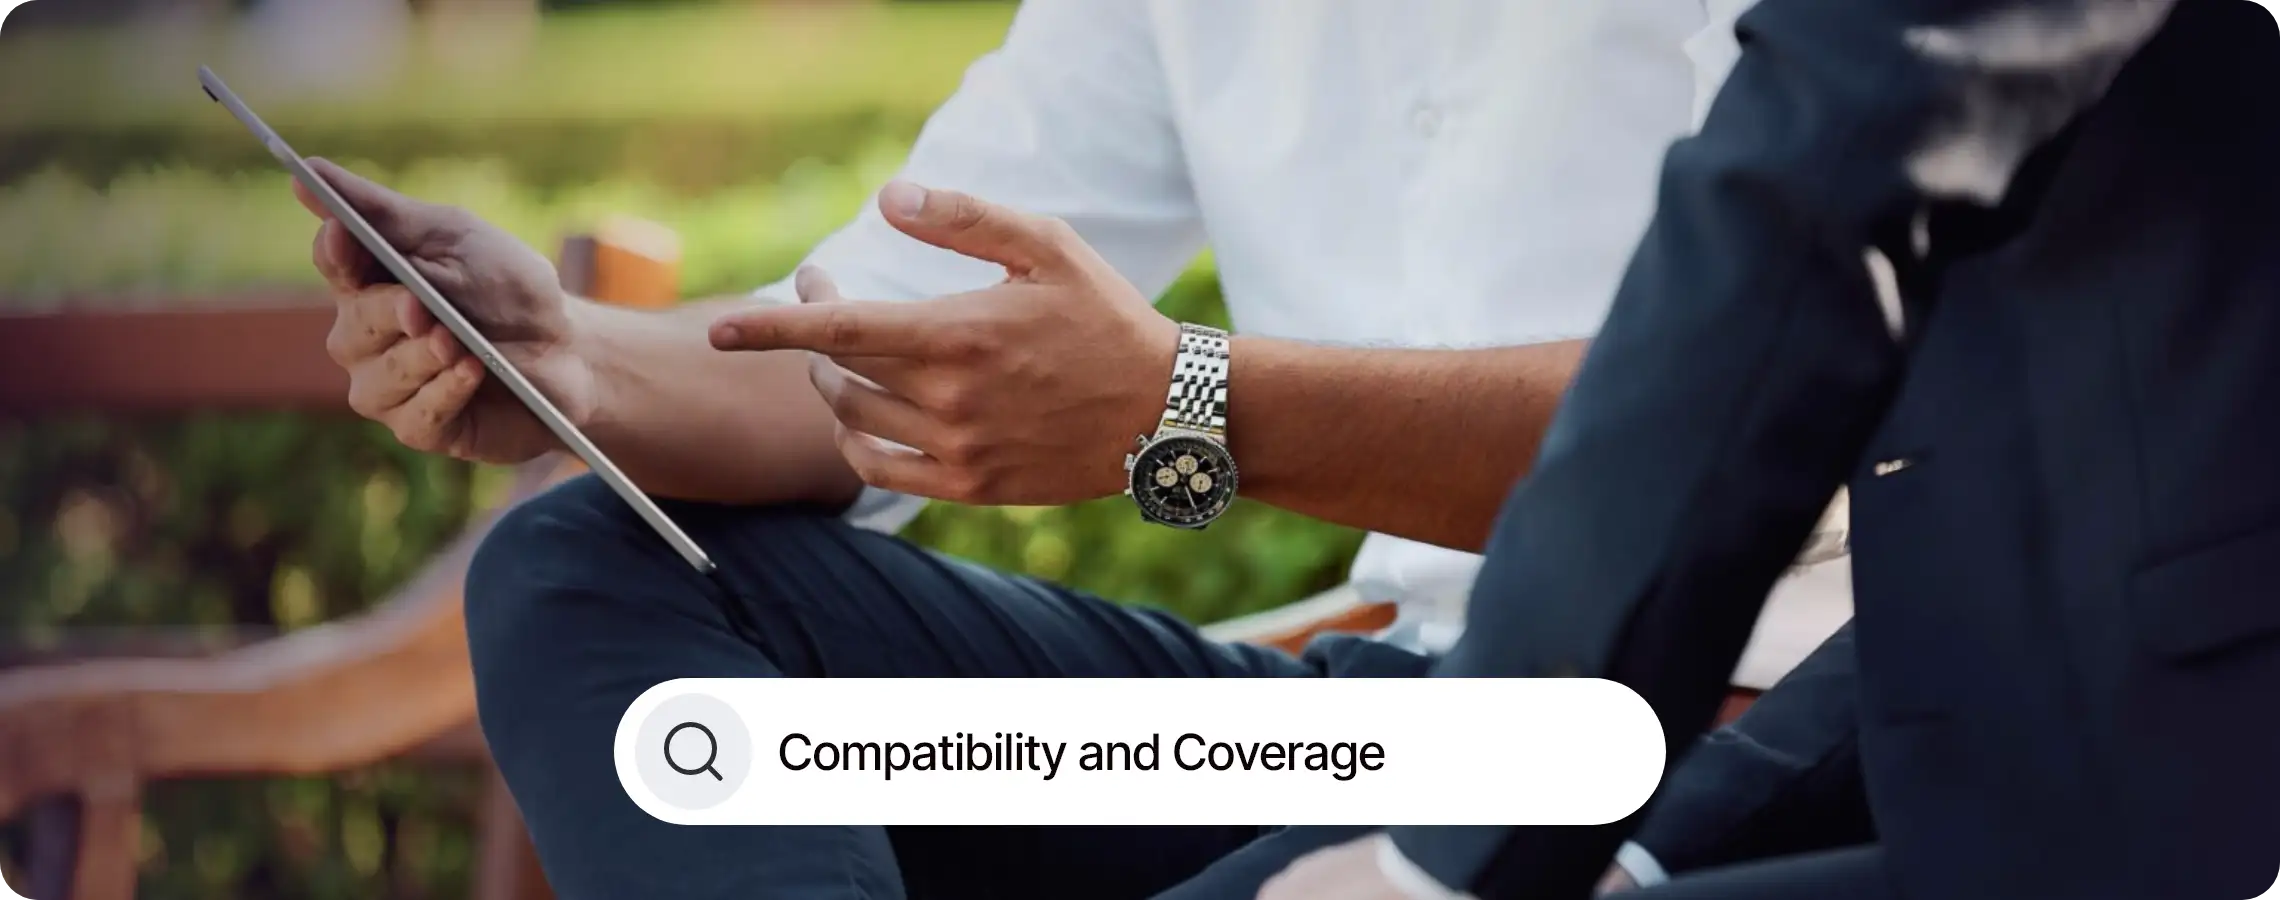 Compatibility and Coverage